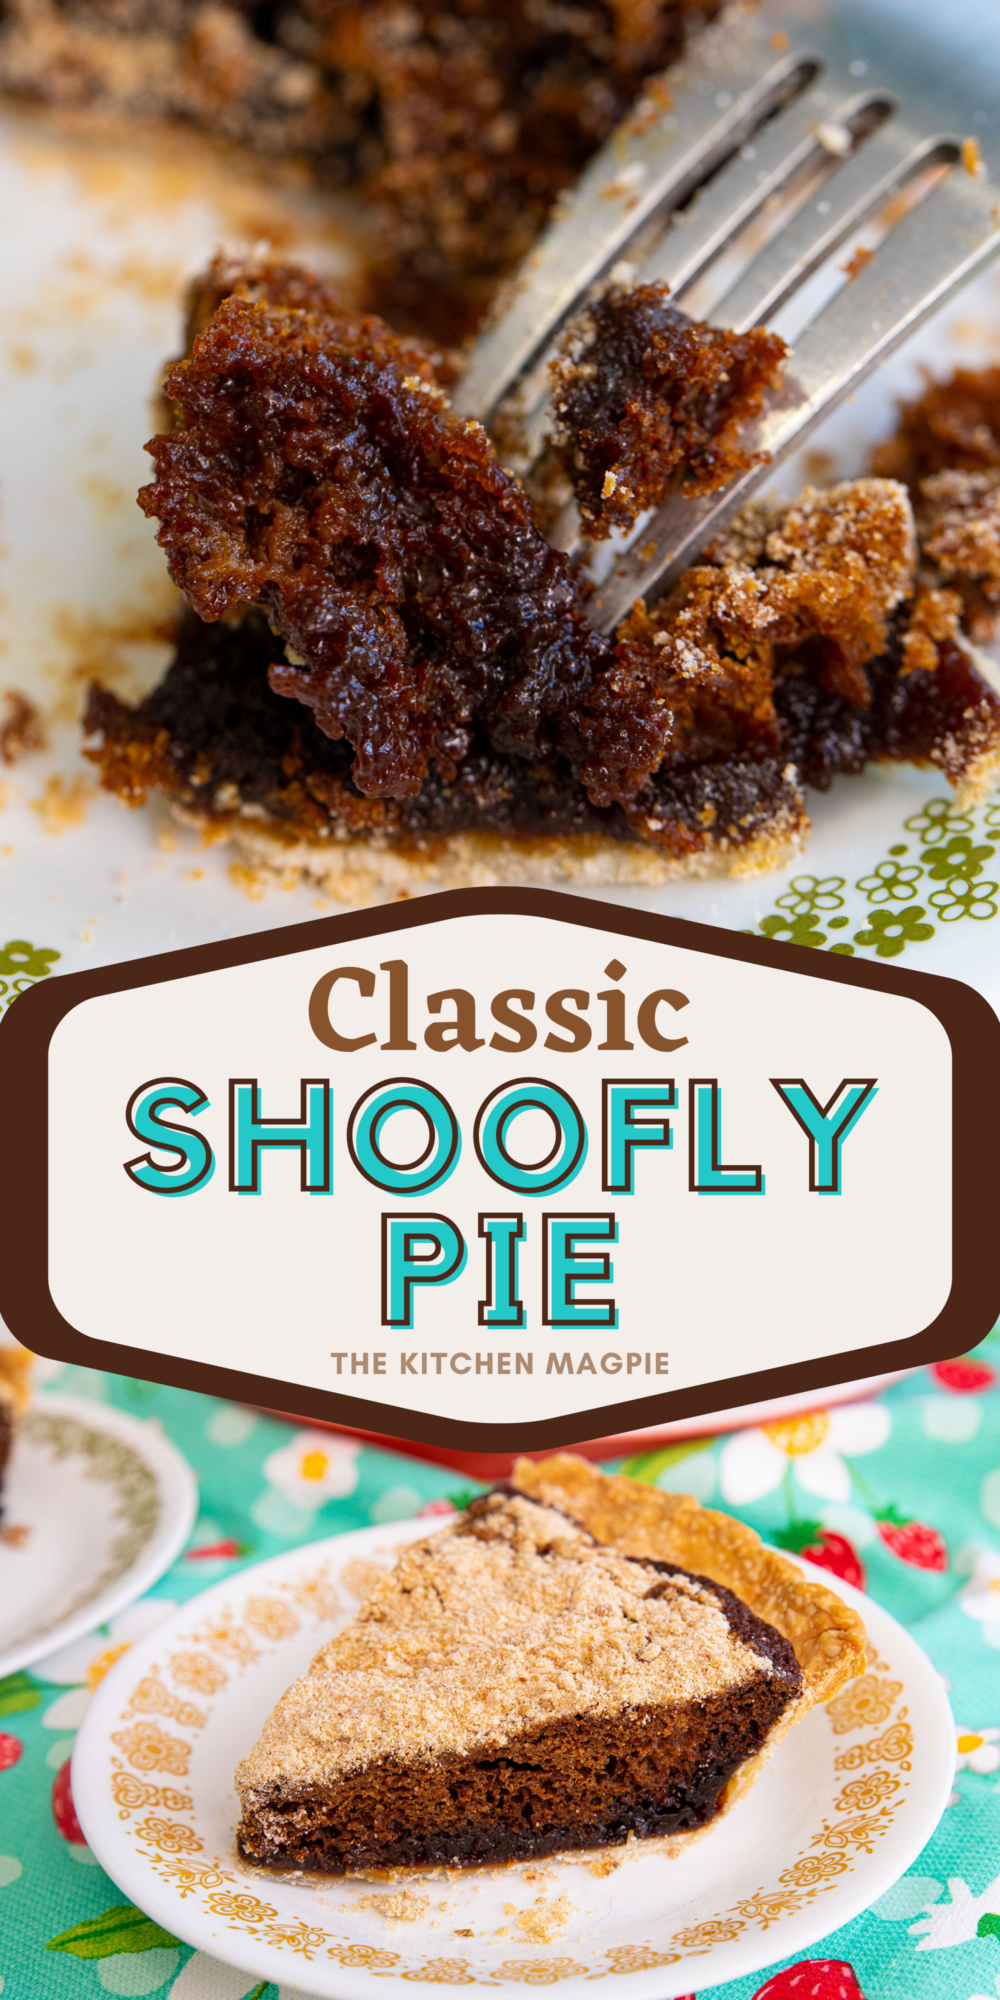 This shoofly pie is an old-fashioned, delicious pie that has a rich, deep molasses filling that is like a sticky toffee cake!
